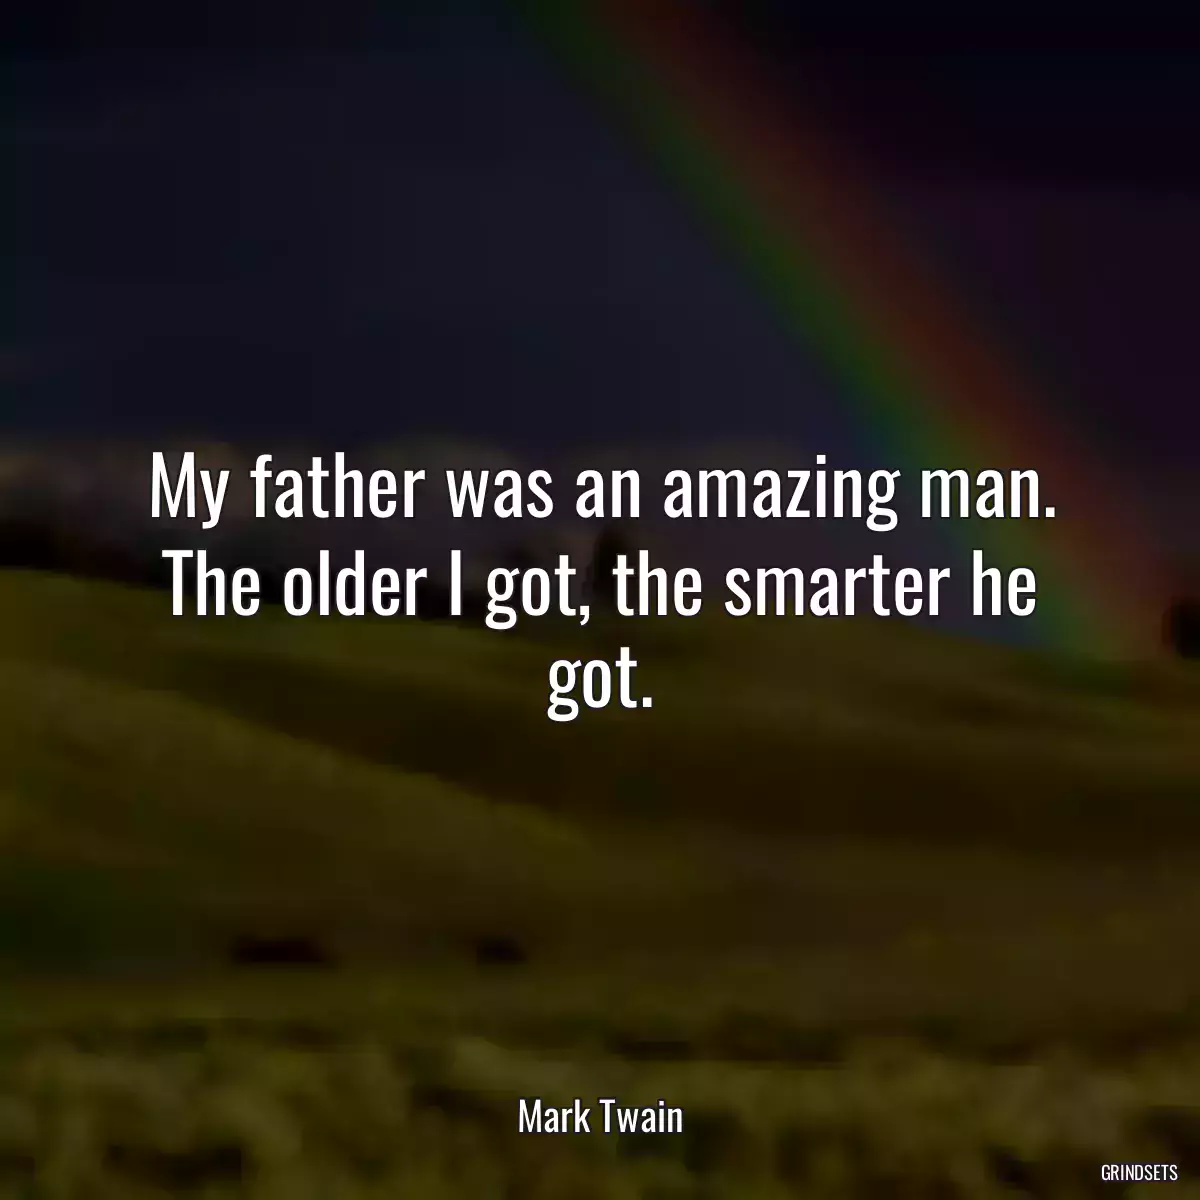 My father was an amazing man. The older I got, the smarter he got.